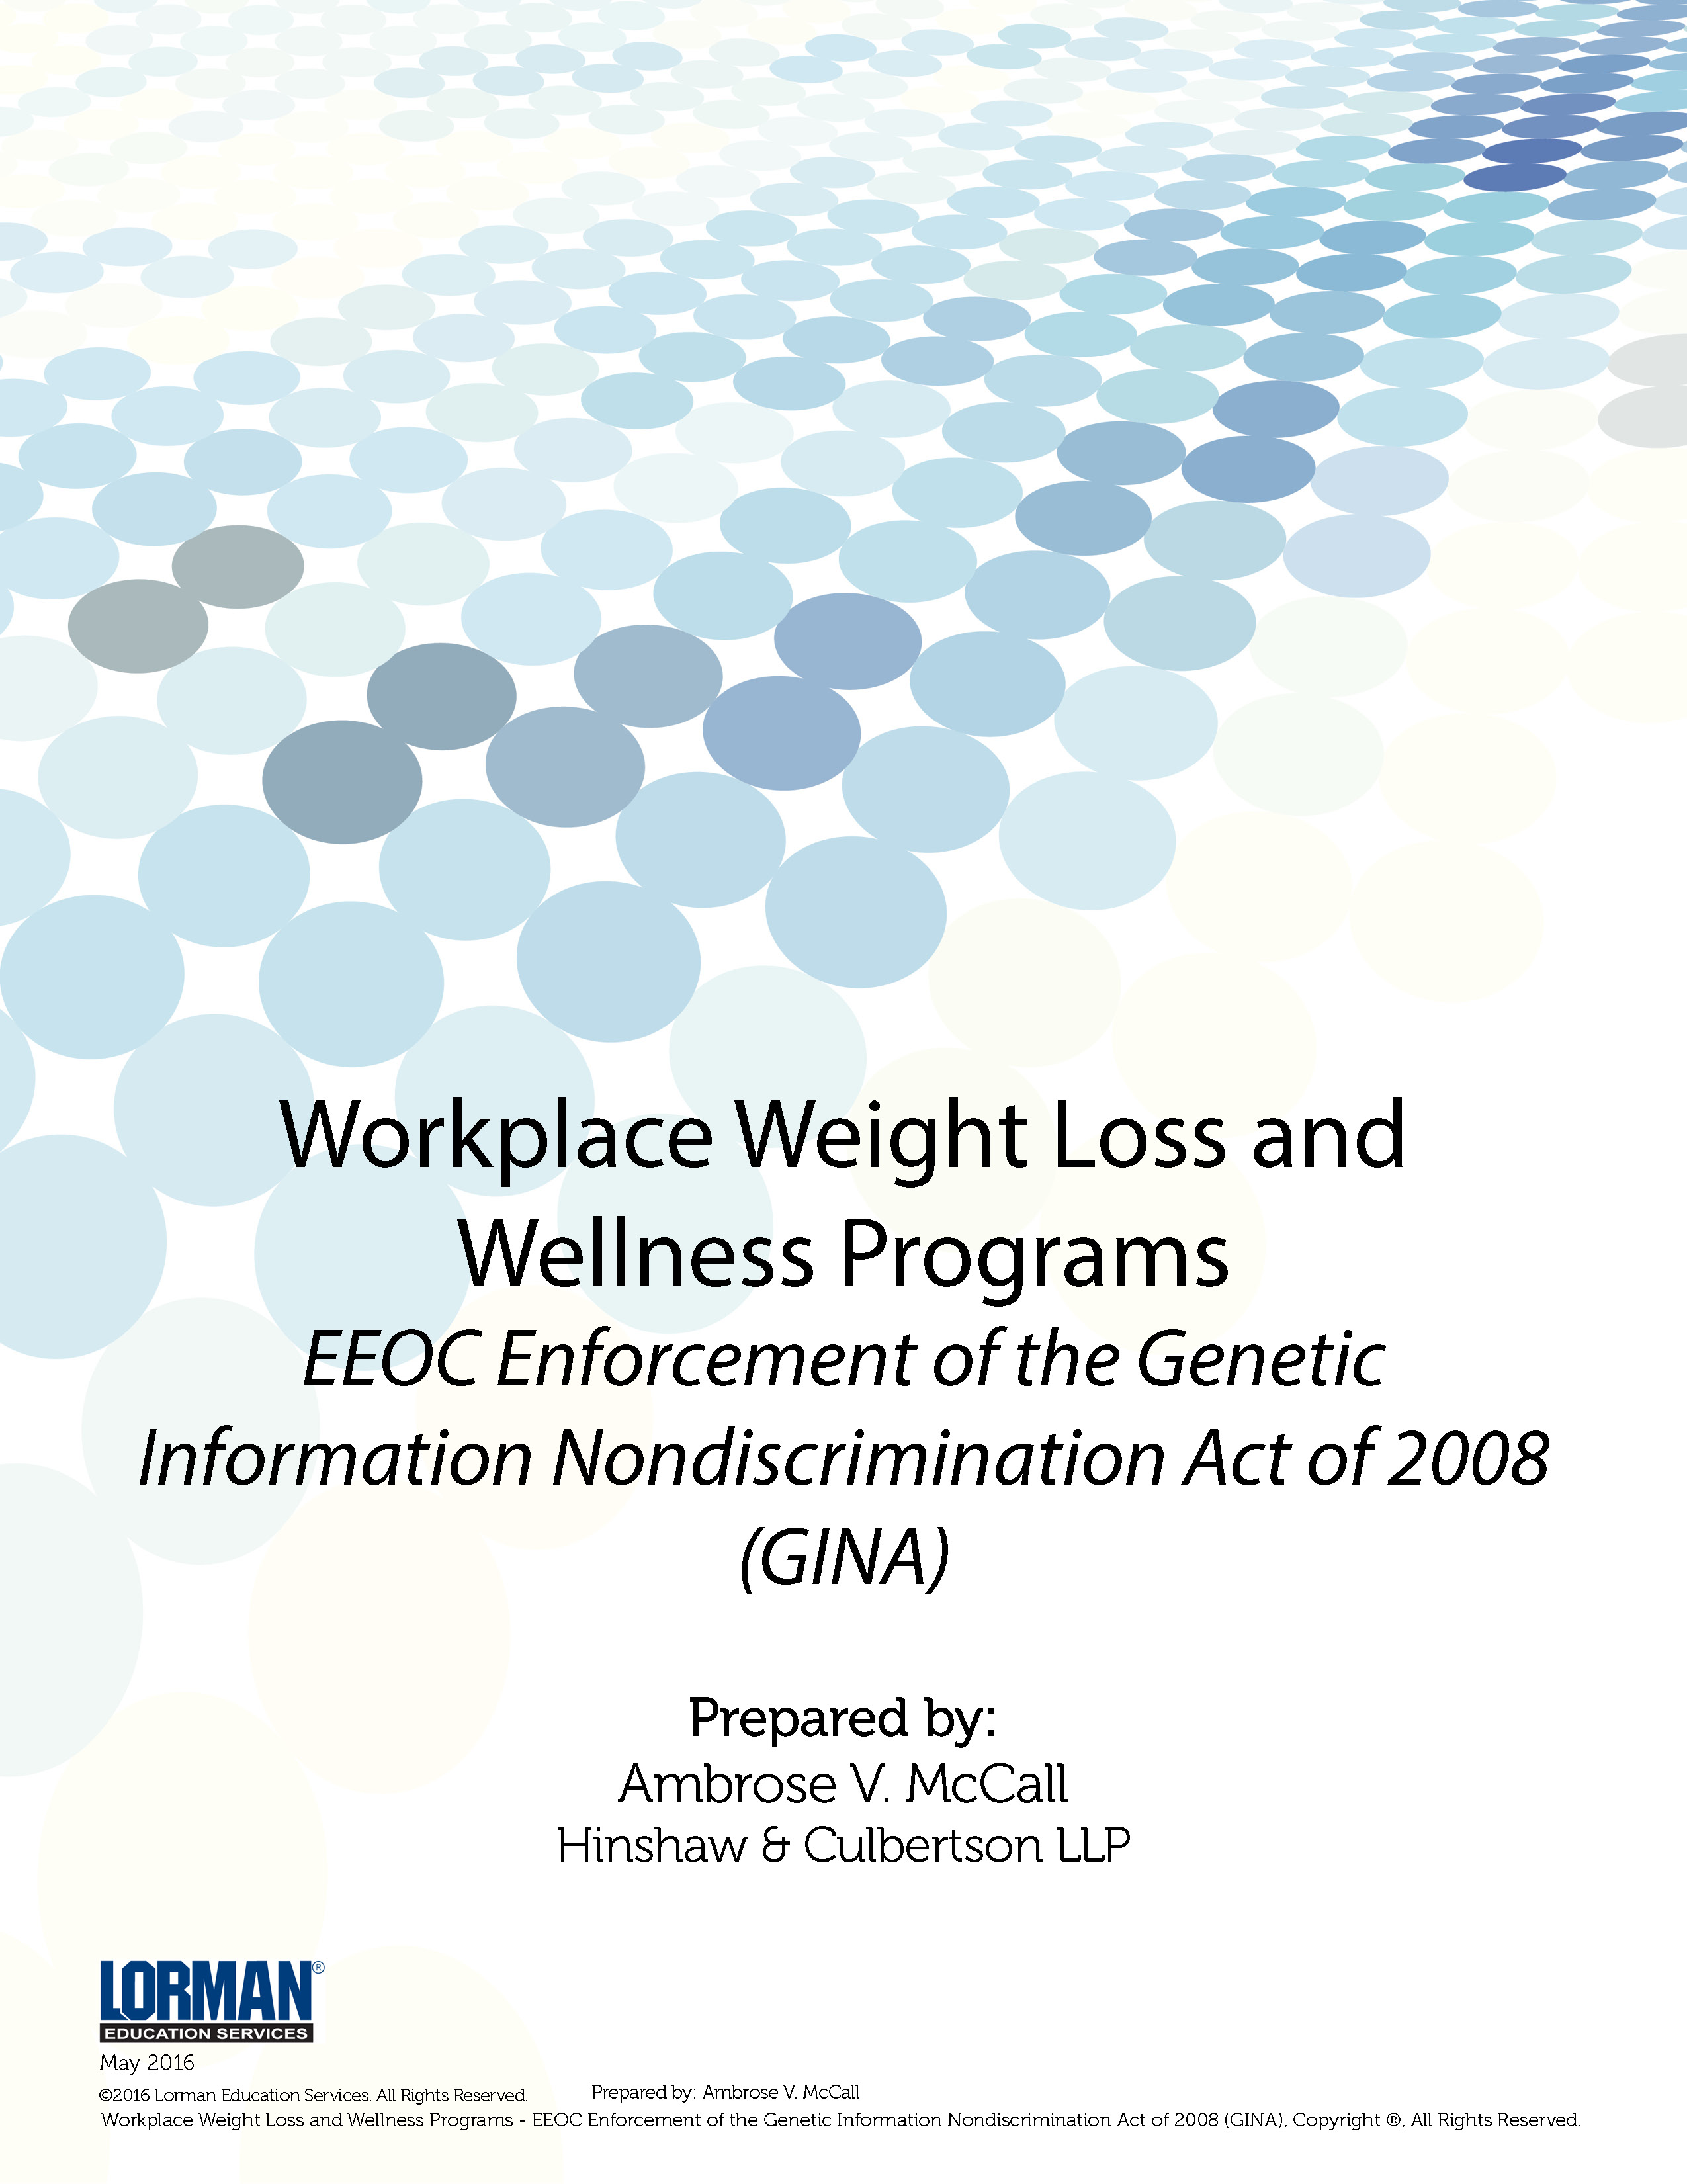 Workplace Weight Loss and Wellness Programs - EEOC Enforcement of GINA